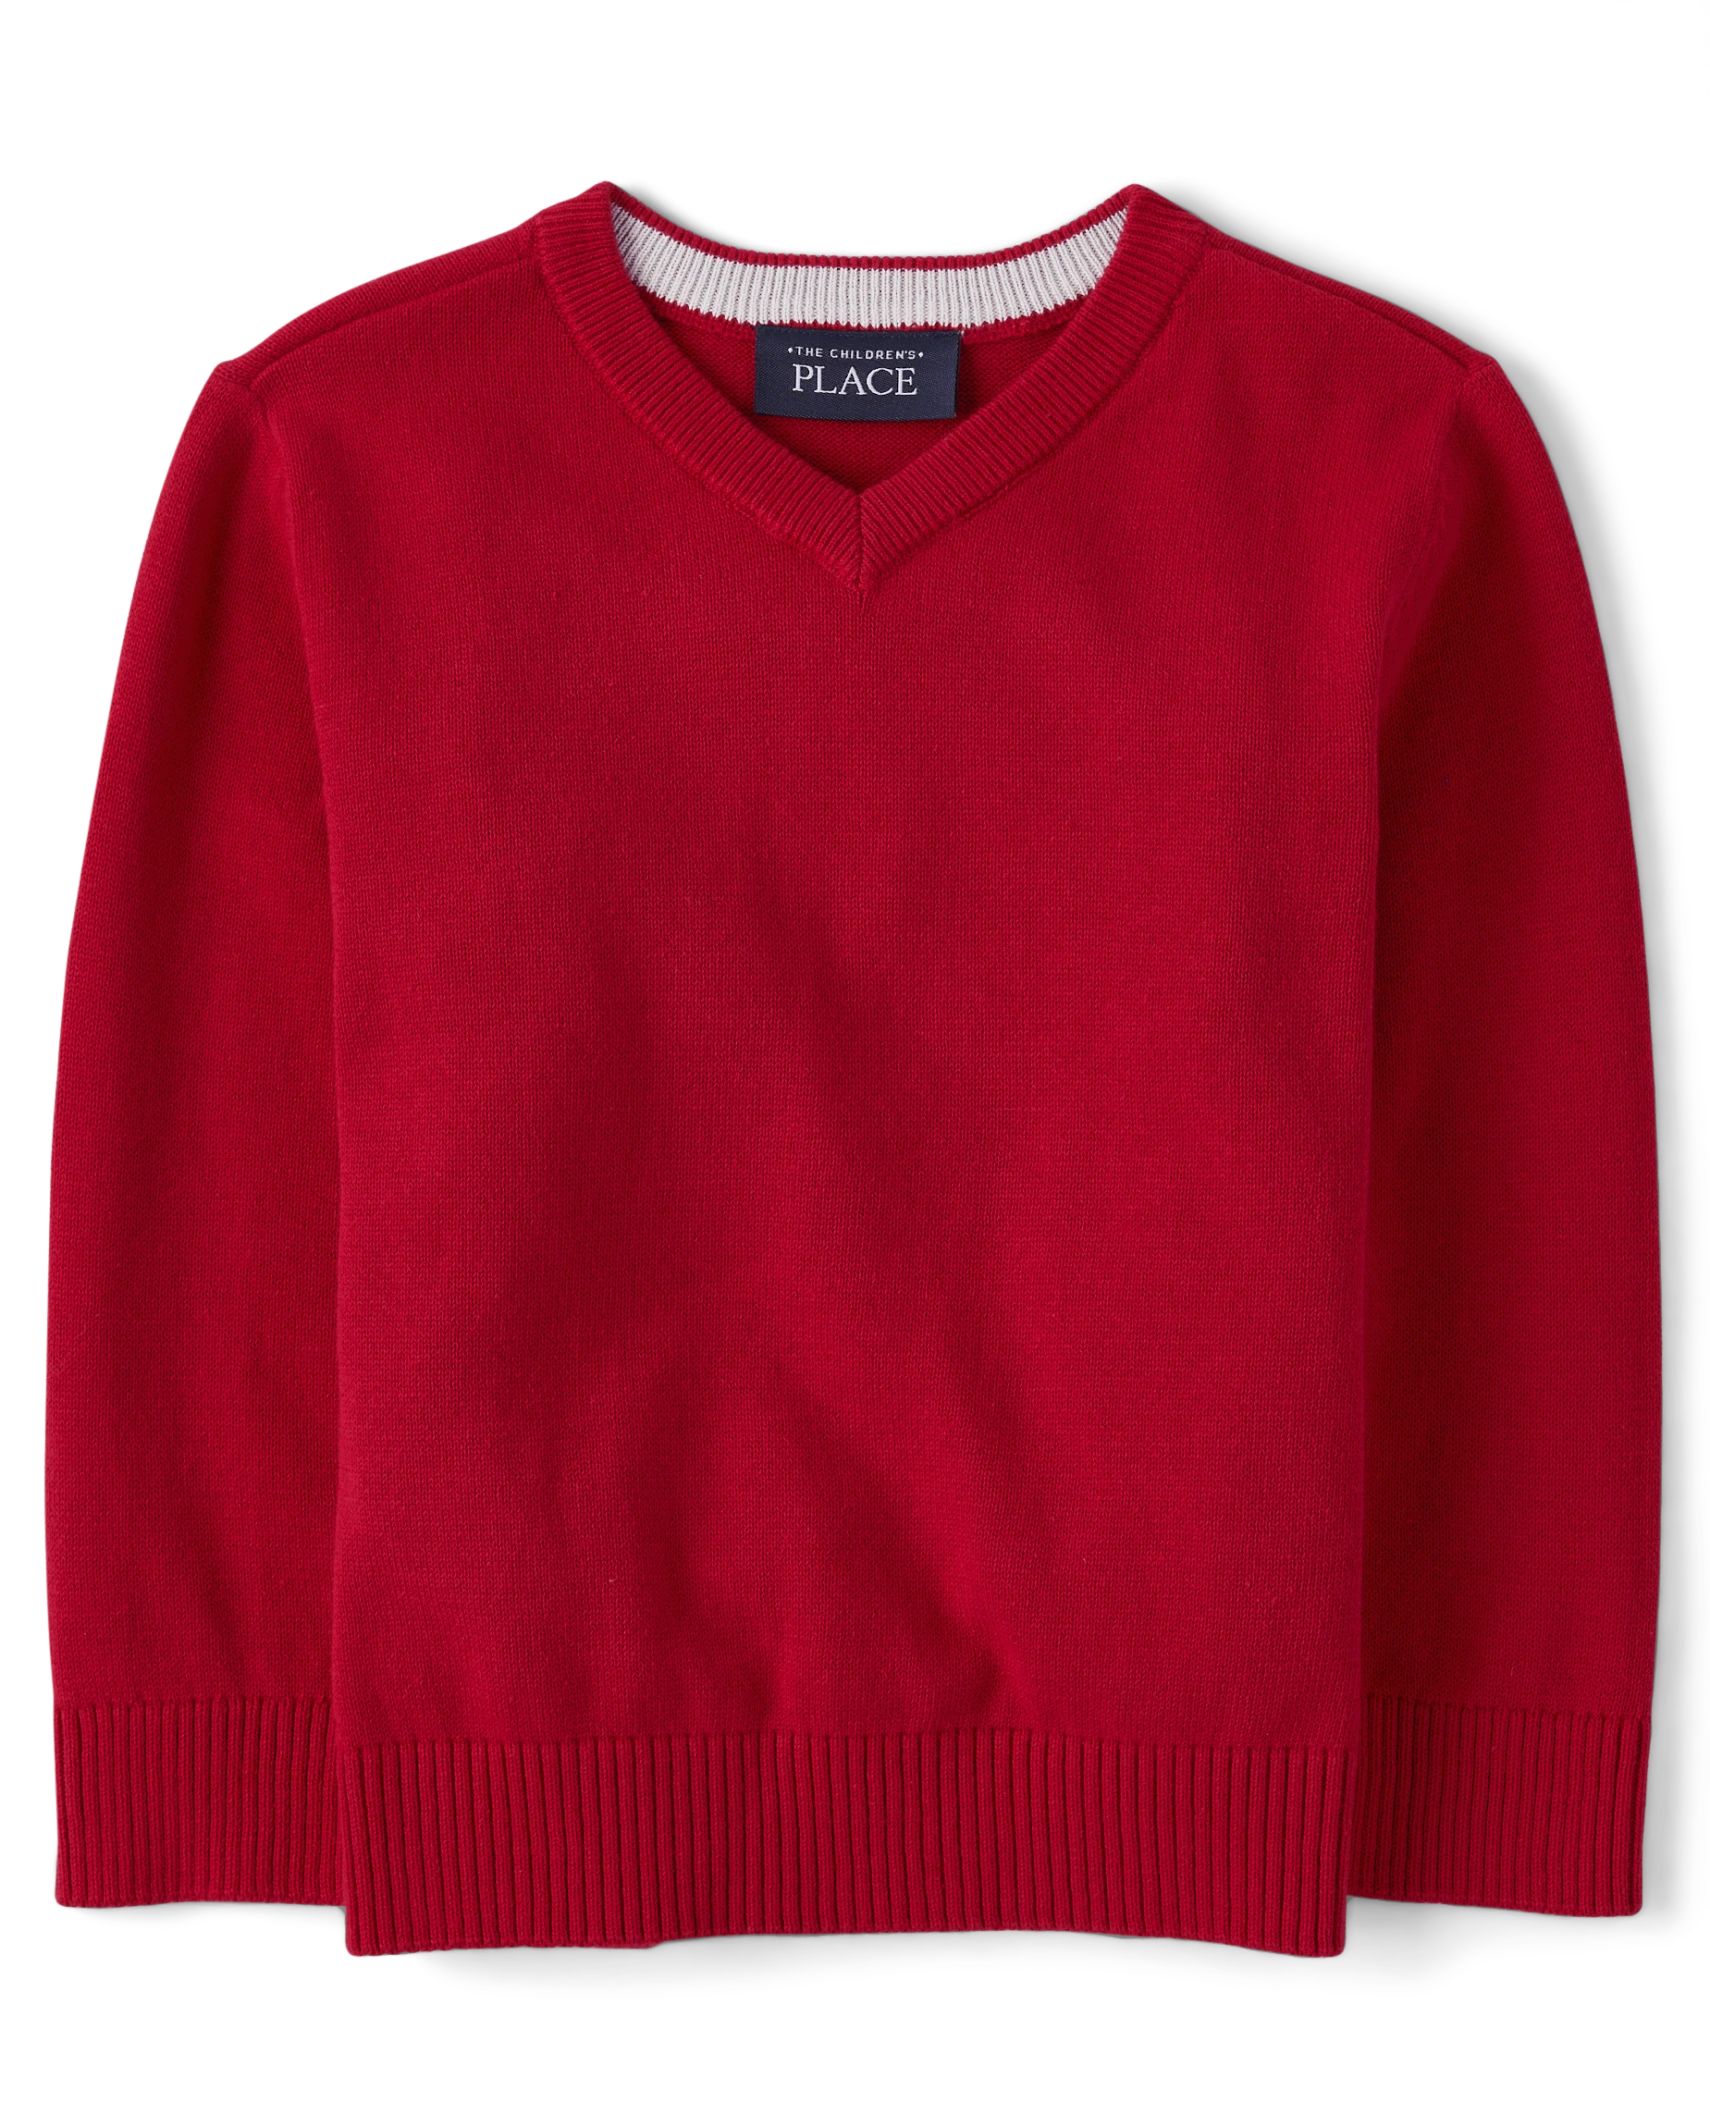 Baby And Toddler Boys V-Neck Sweater - classicred | The Children's Place